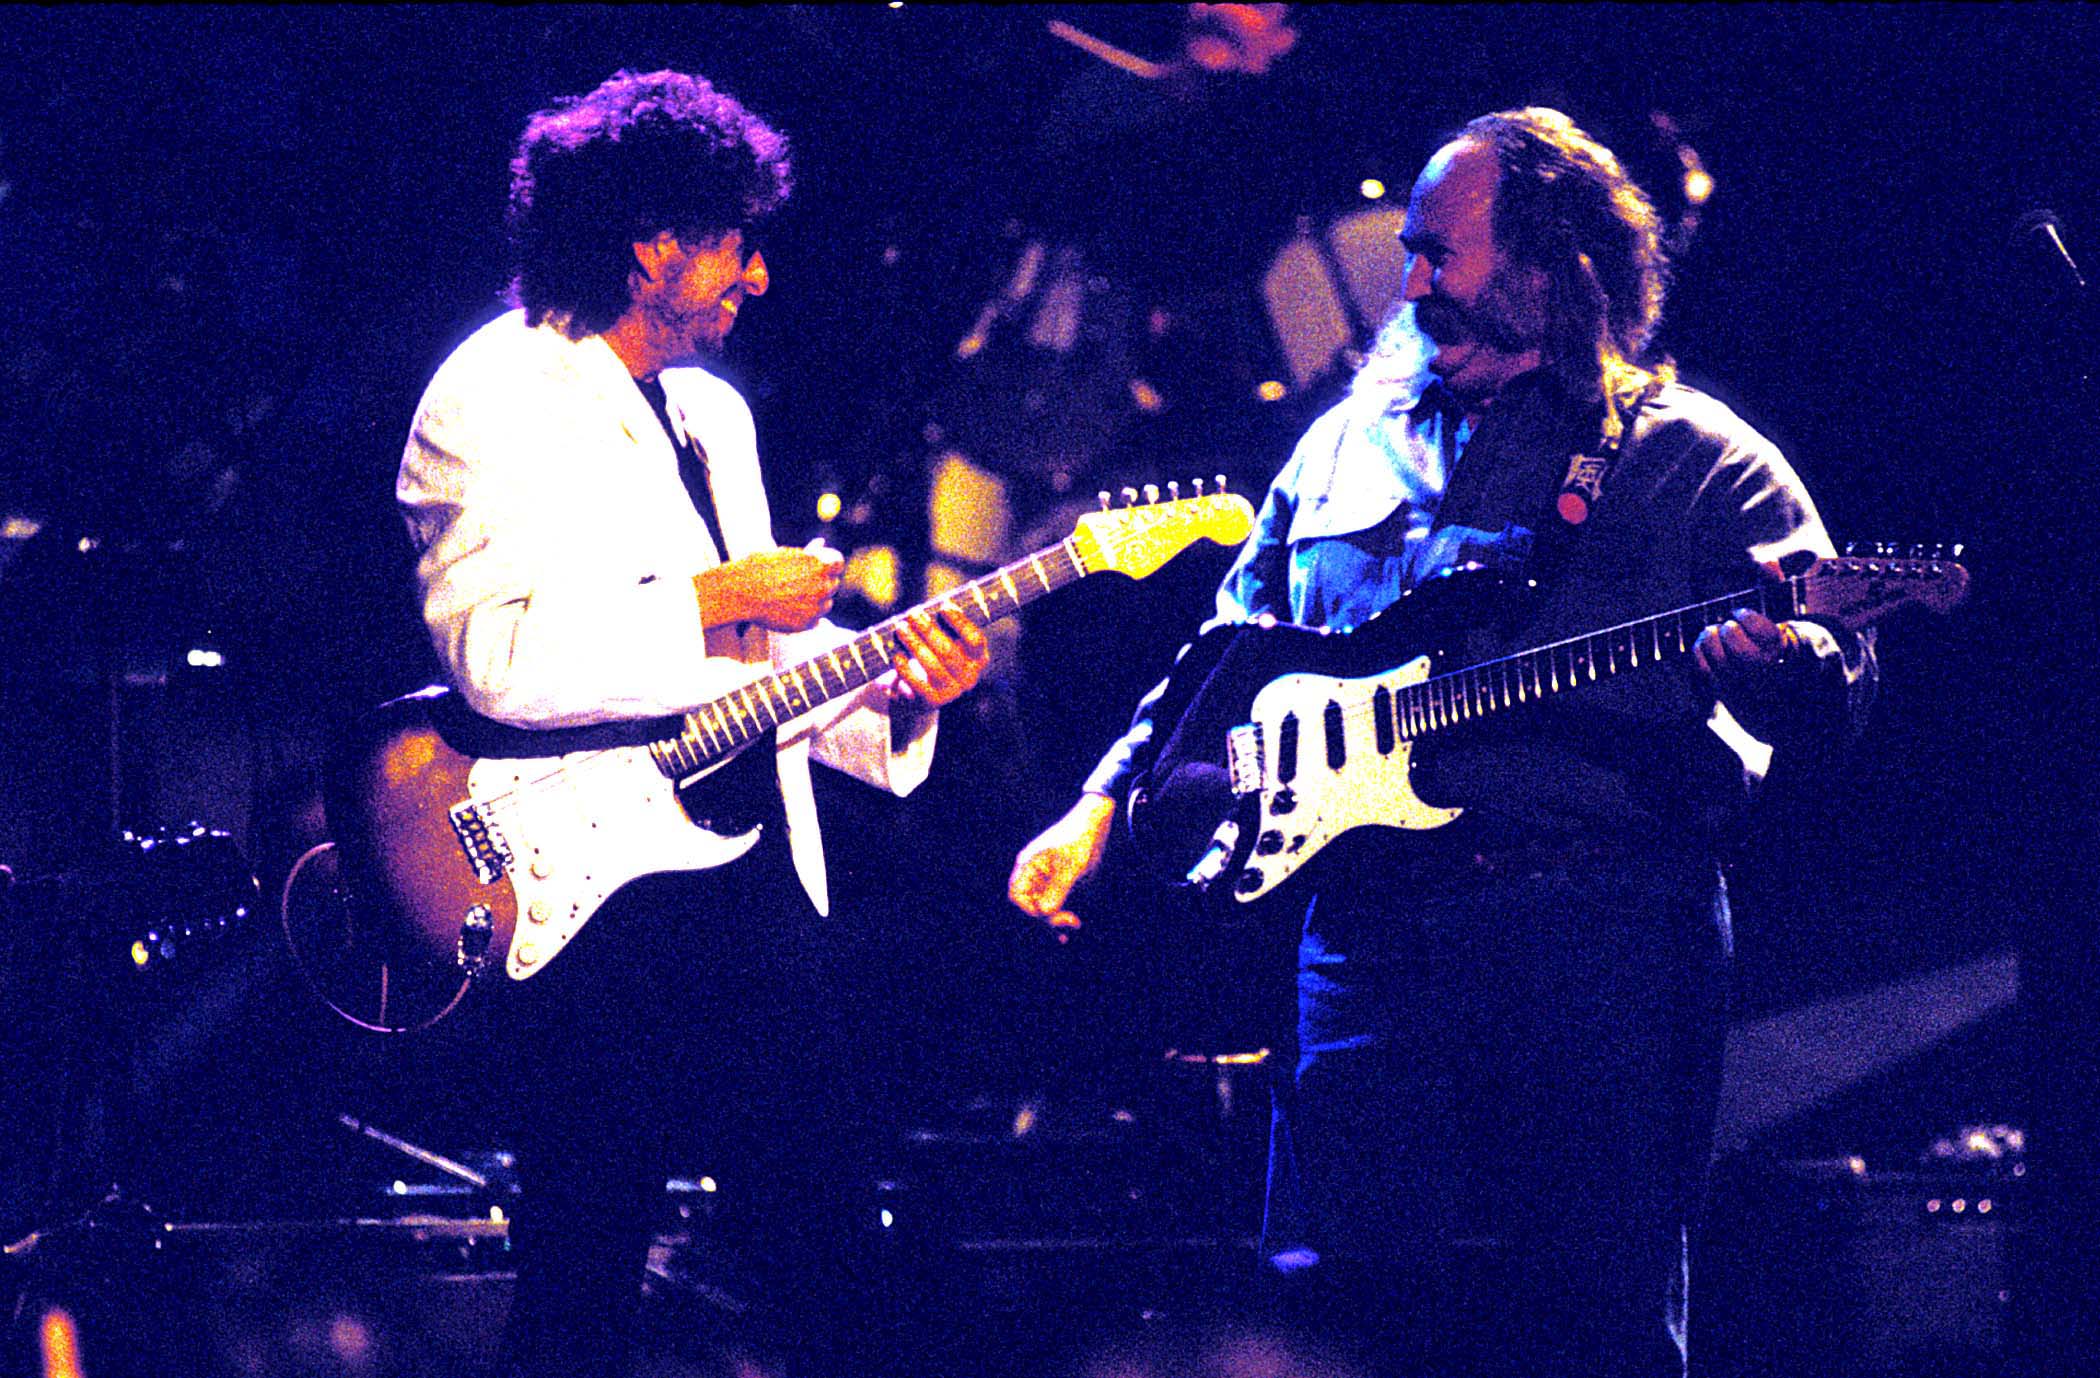 Bob Dylan and David Crosby hold guitars onstage together.